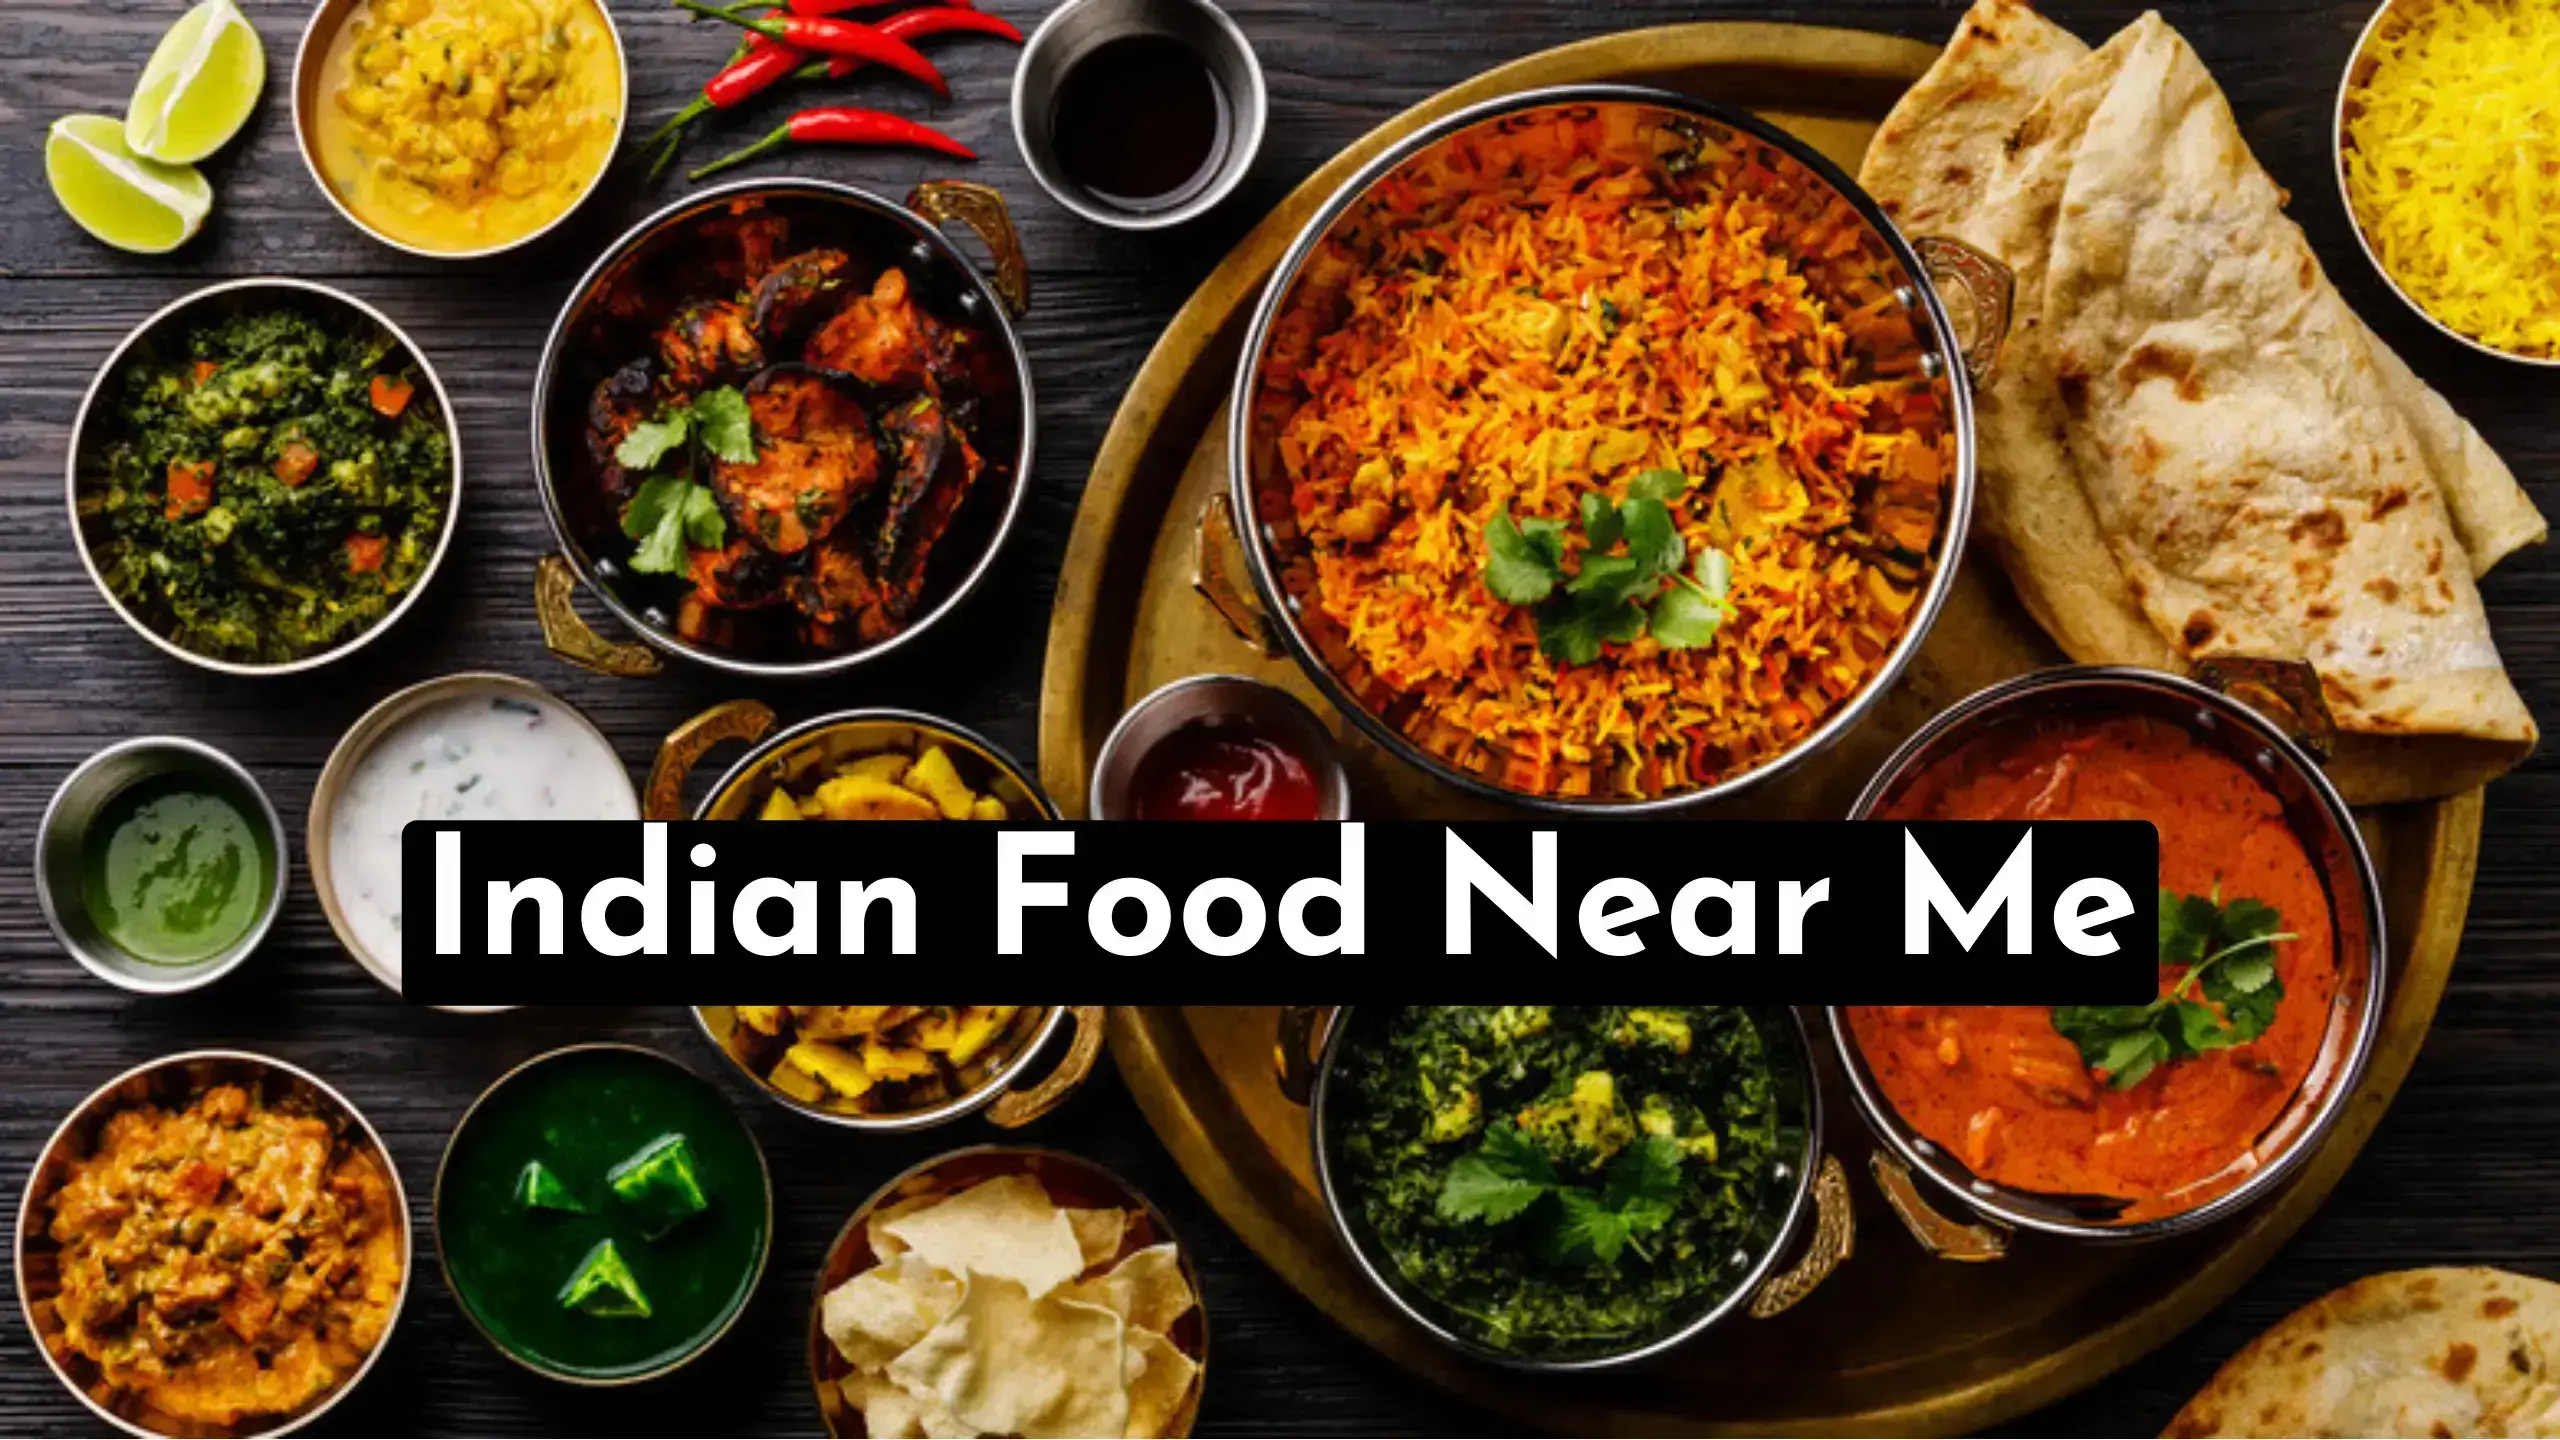 A Quick Guide To Find Authentic Indian Food Near Me Locations & Restaurants |Also Discover The Best Indian Dishes With Health Benefits & FAQs